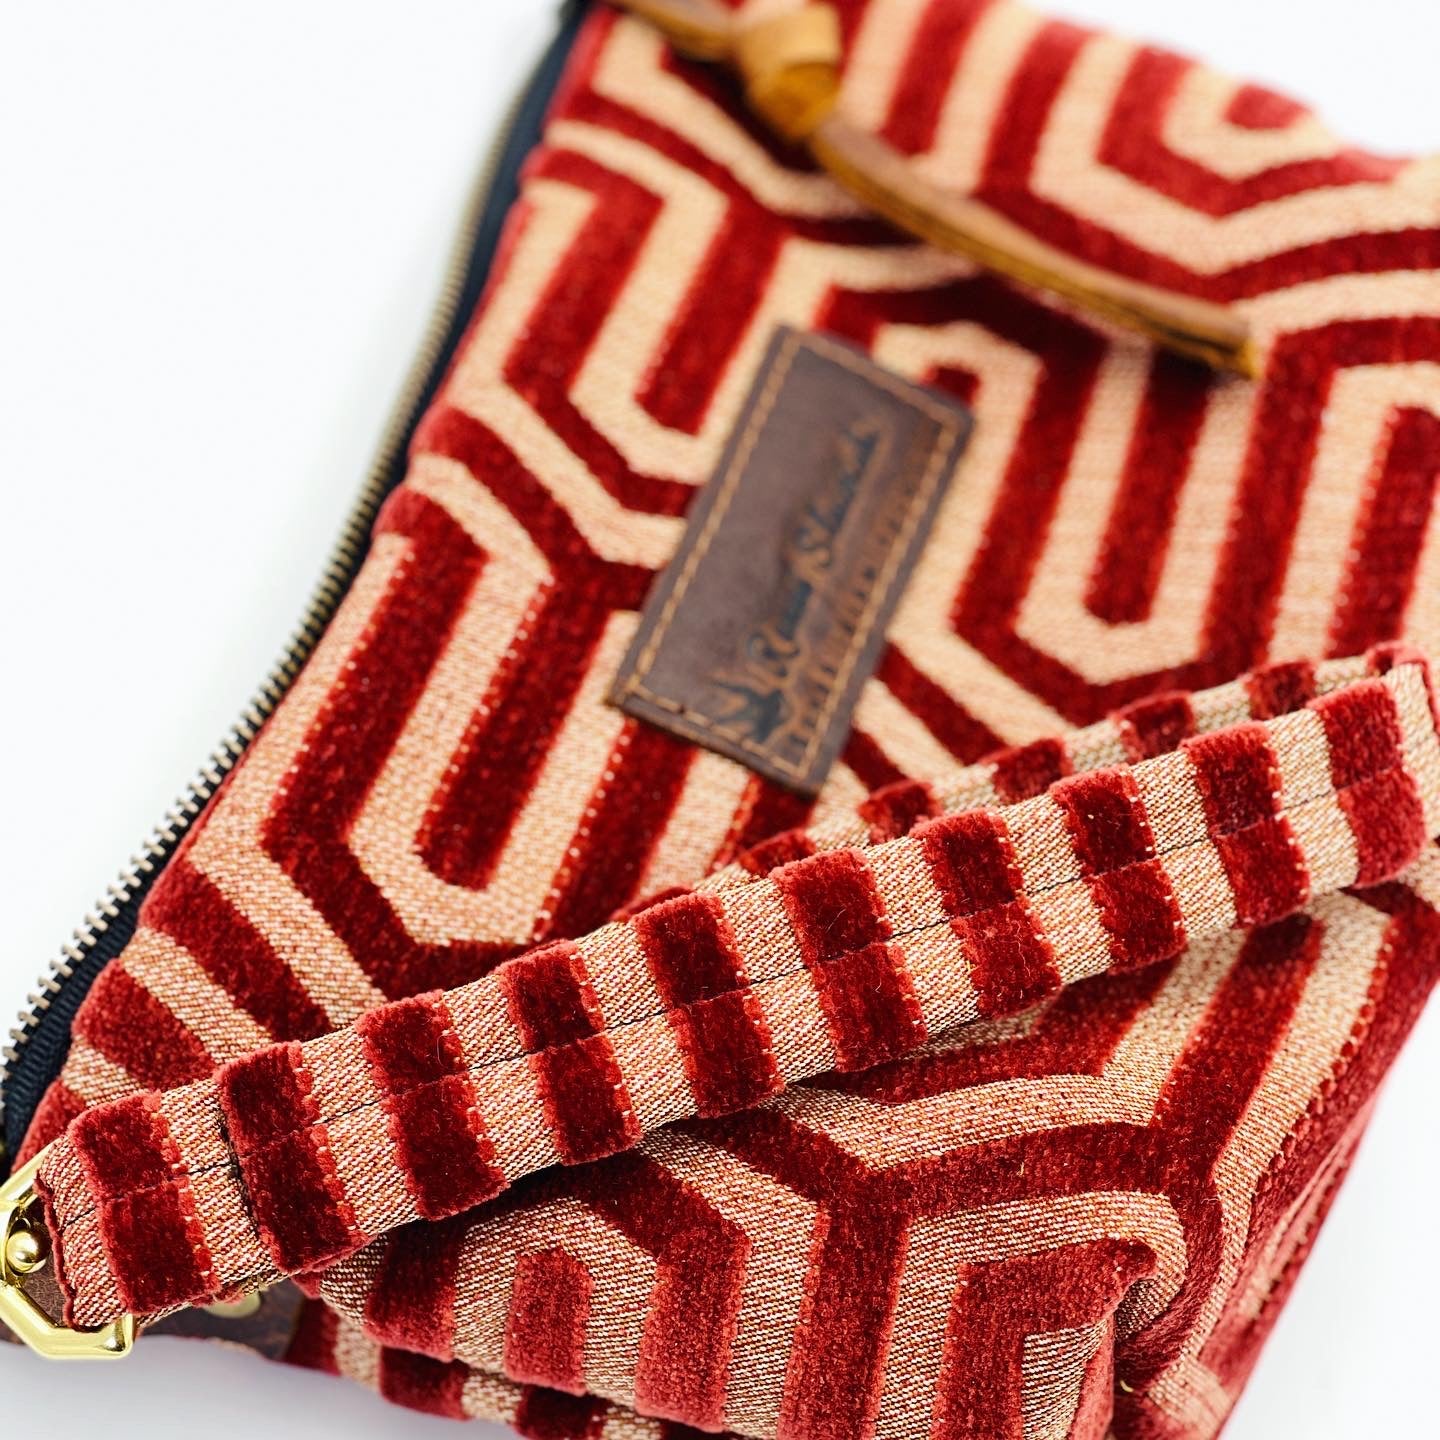 Red Velour Clutch - yellow floral lining